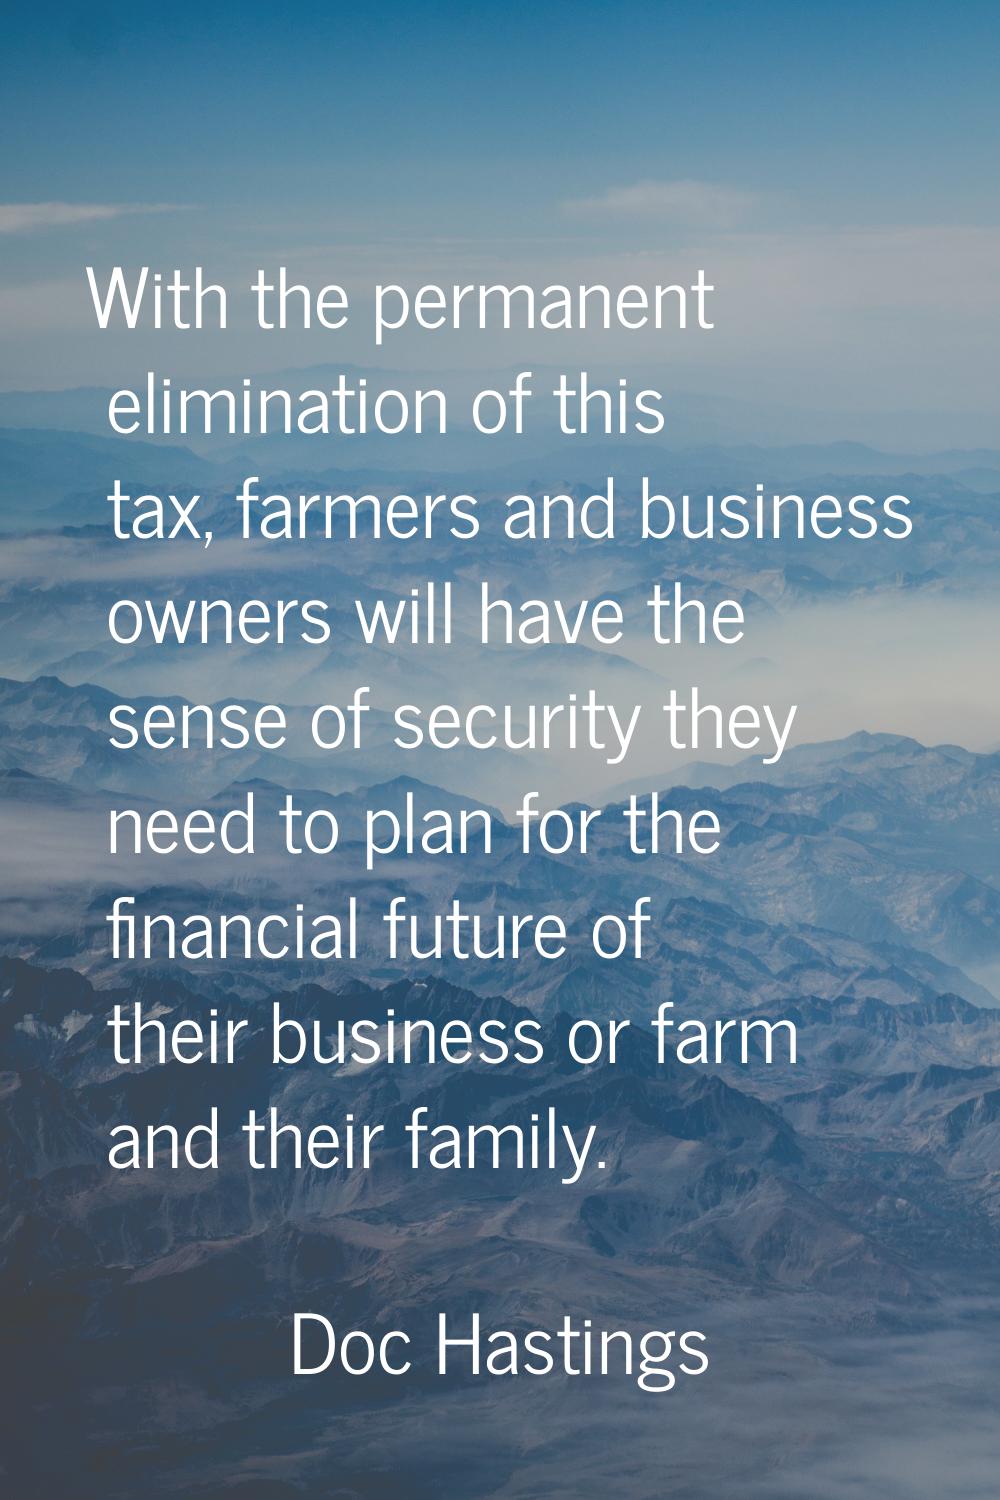 With the permanent elimination of this tax, farmers and business owners will have the sense of secu